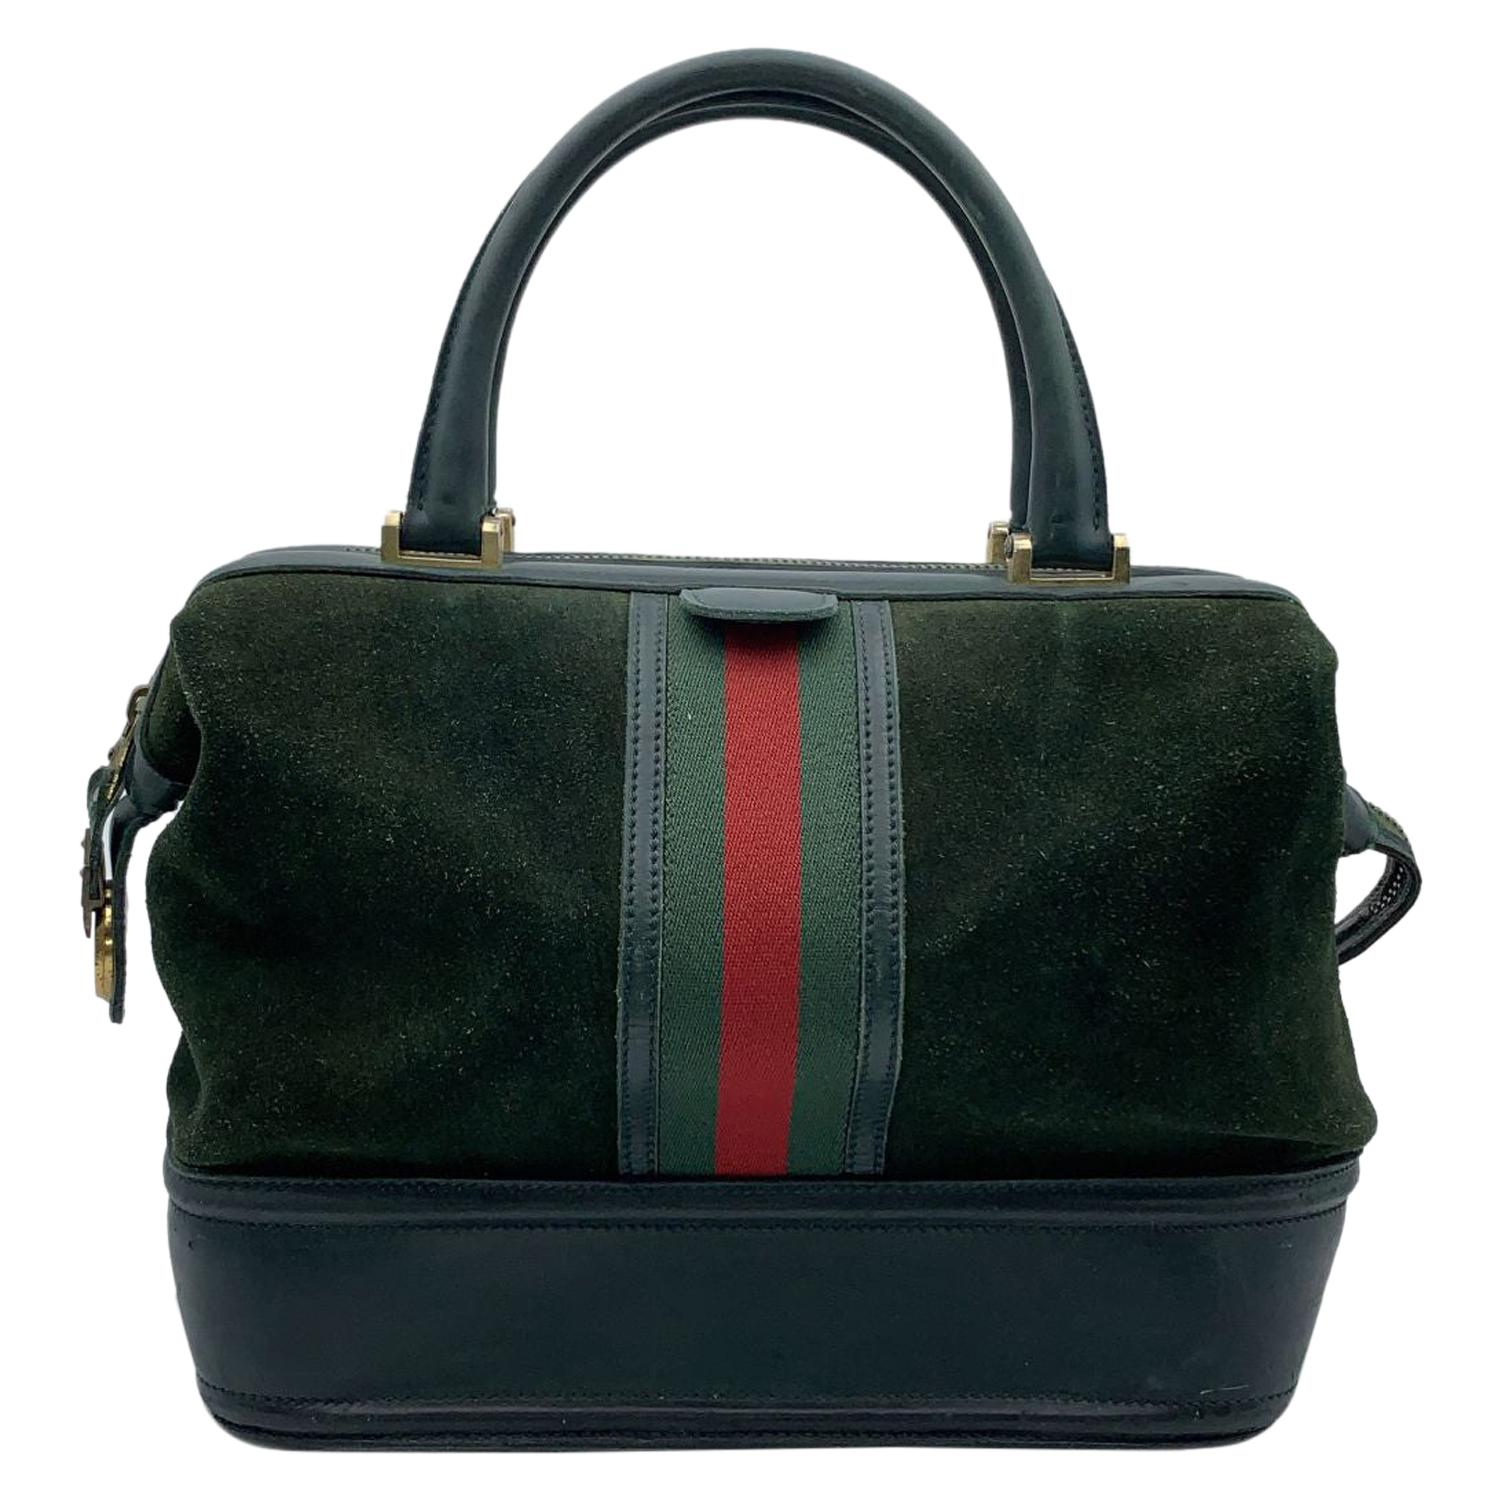 Gucci Vintage Green Suede Leather Travel Bag Train Case with Stripes